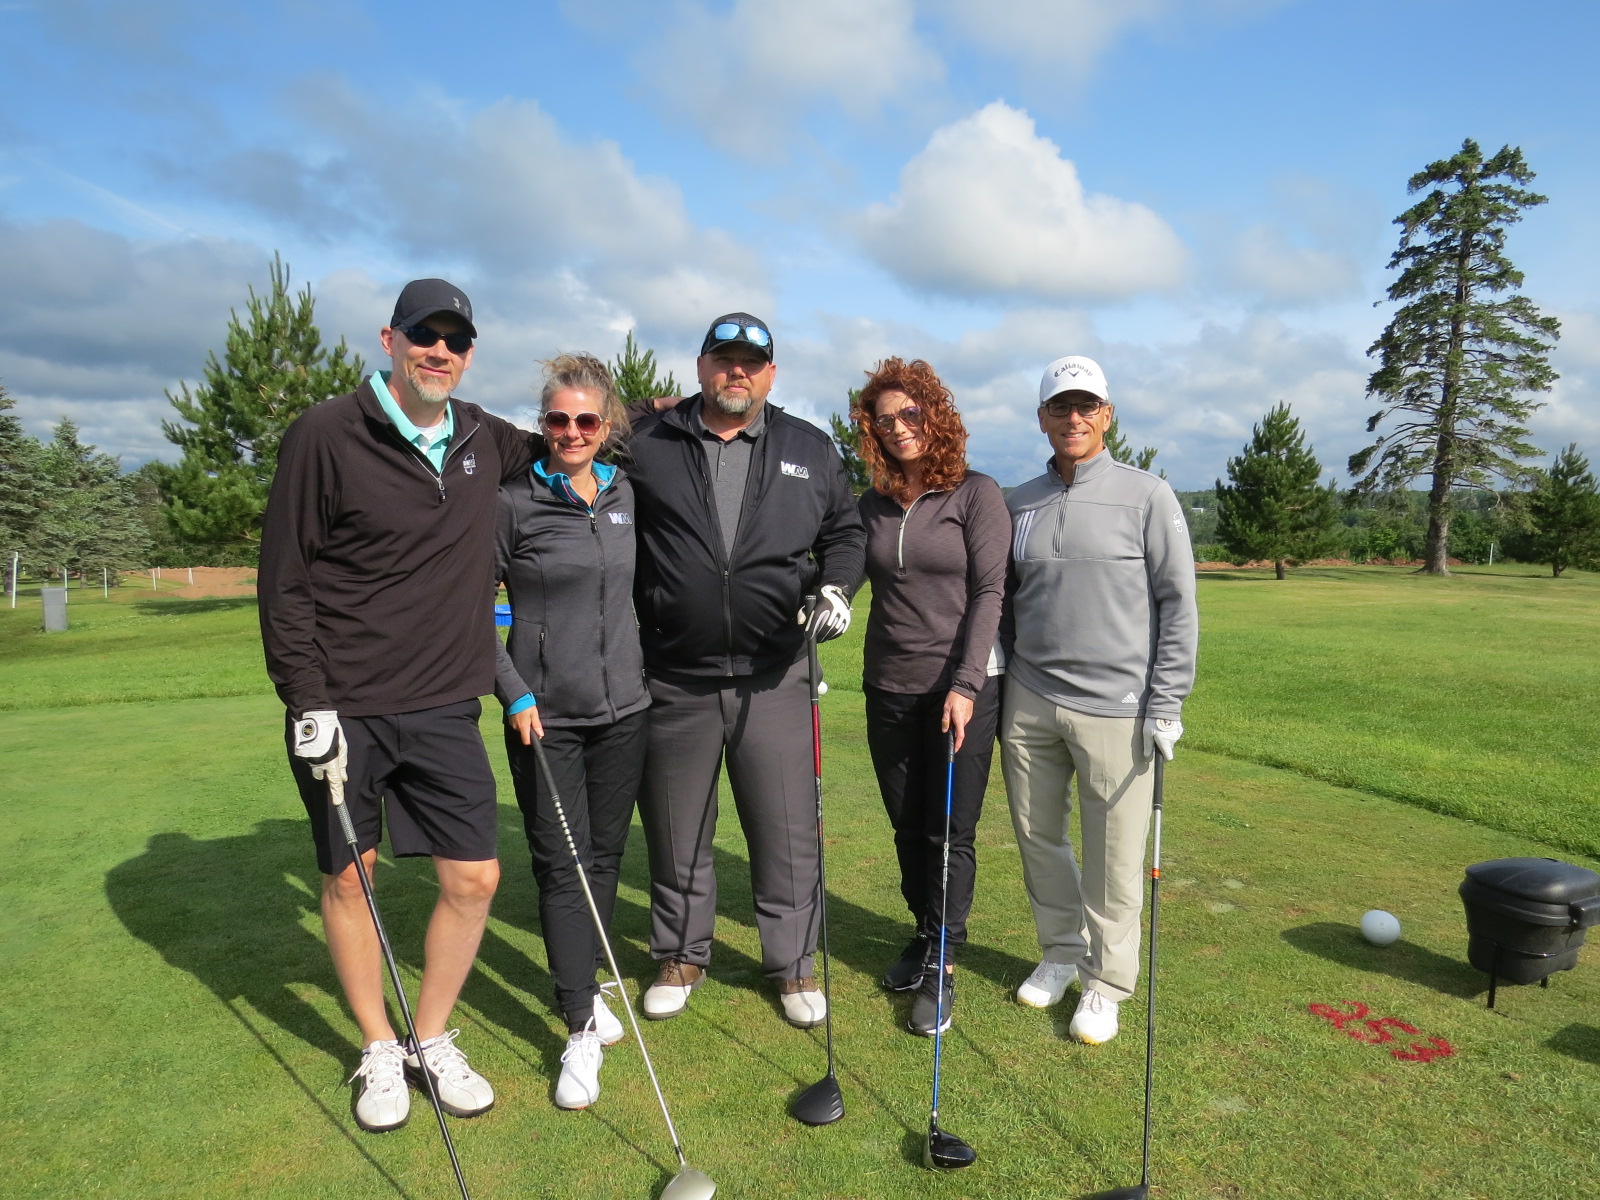 Five people smiling for a photo on a golf course